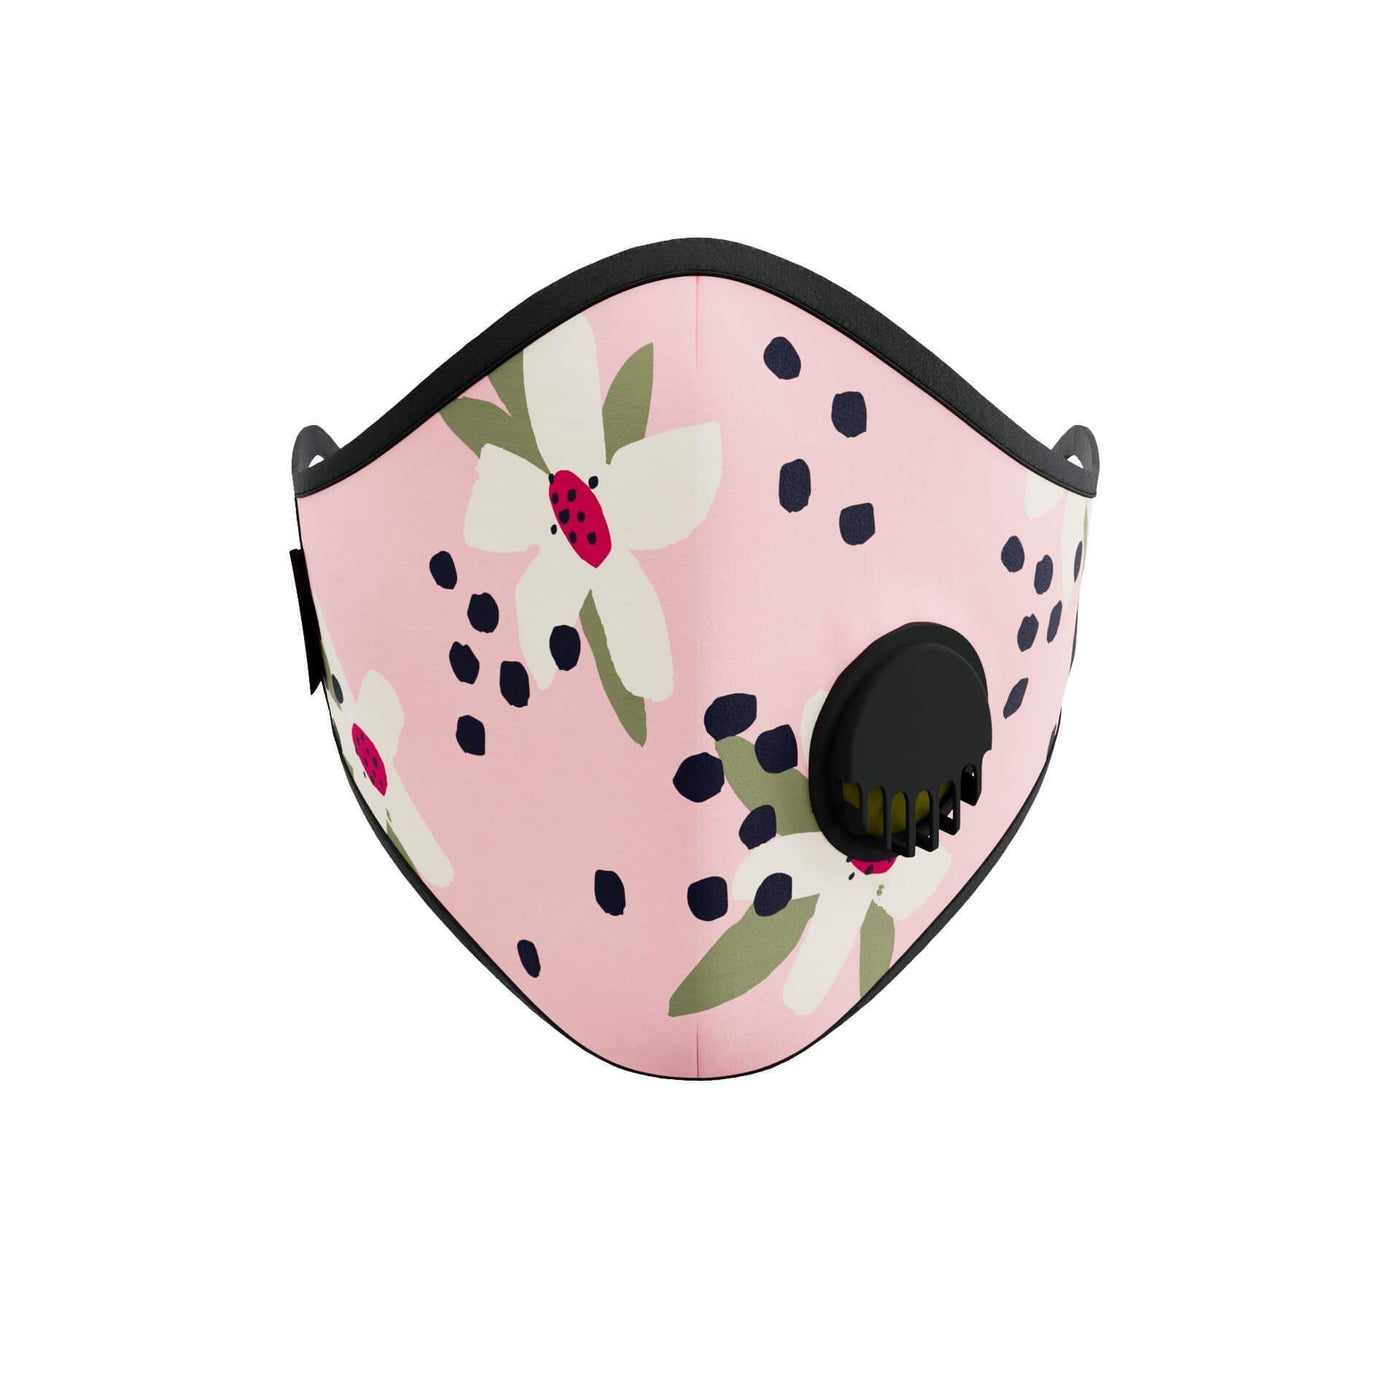 Floral Blush Print Face Mask - The Clothing LoungeWIINO